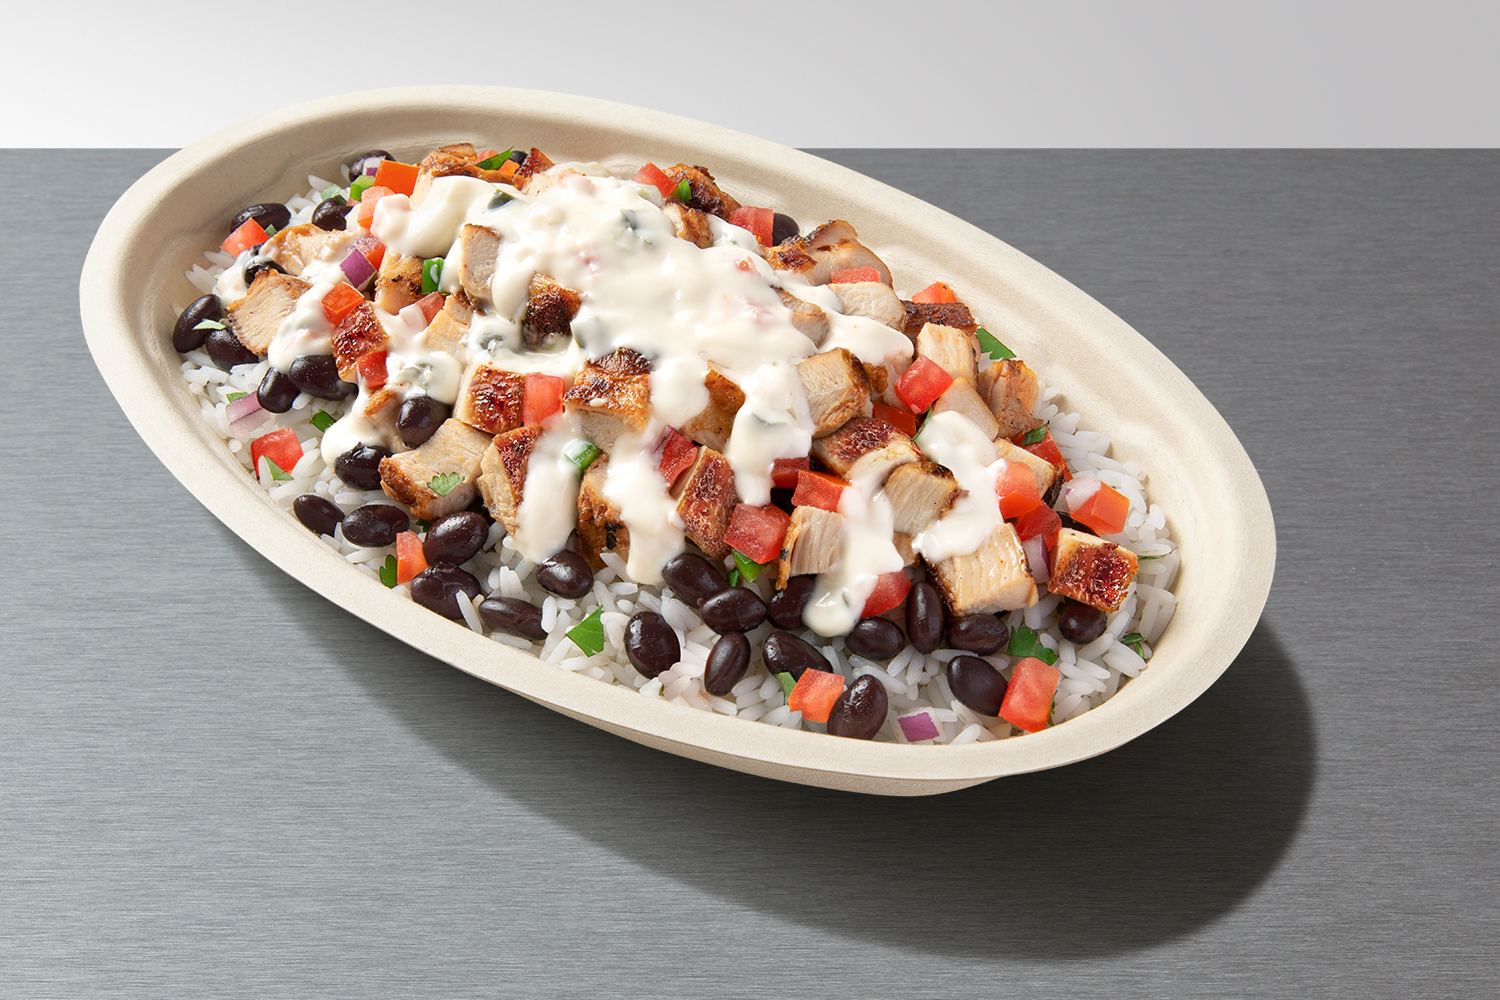 Chipotle Mexican Grill makes holiday window displays with its food